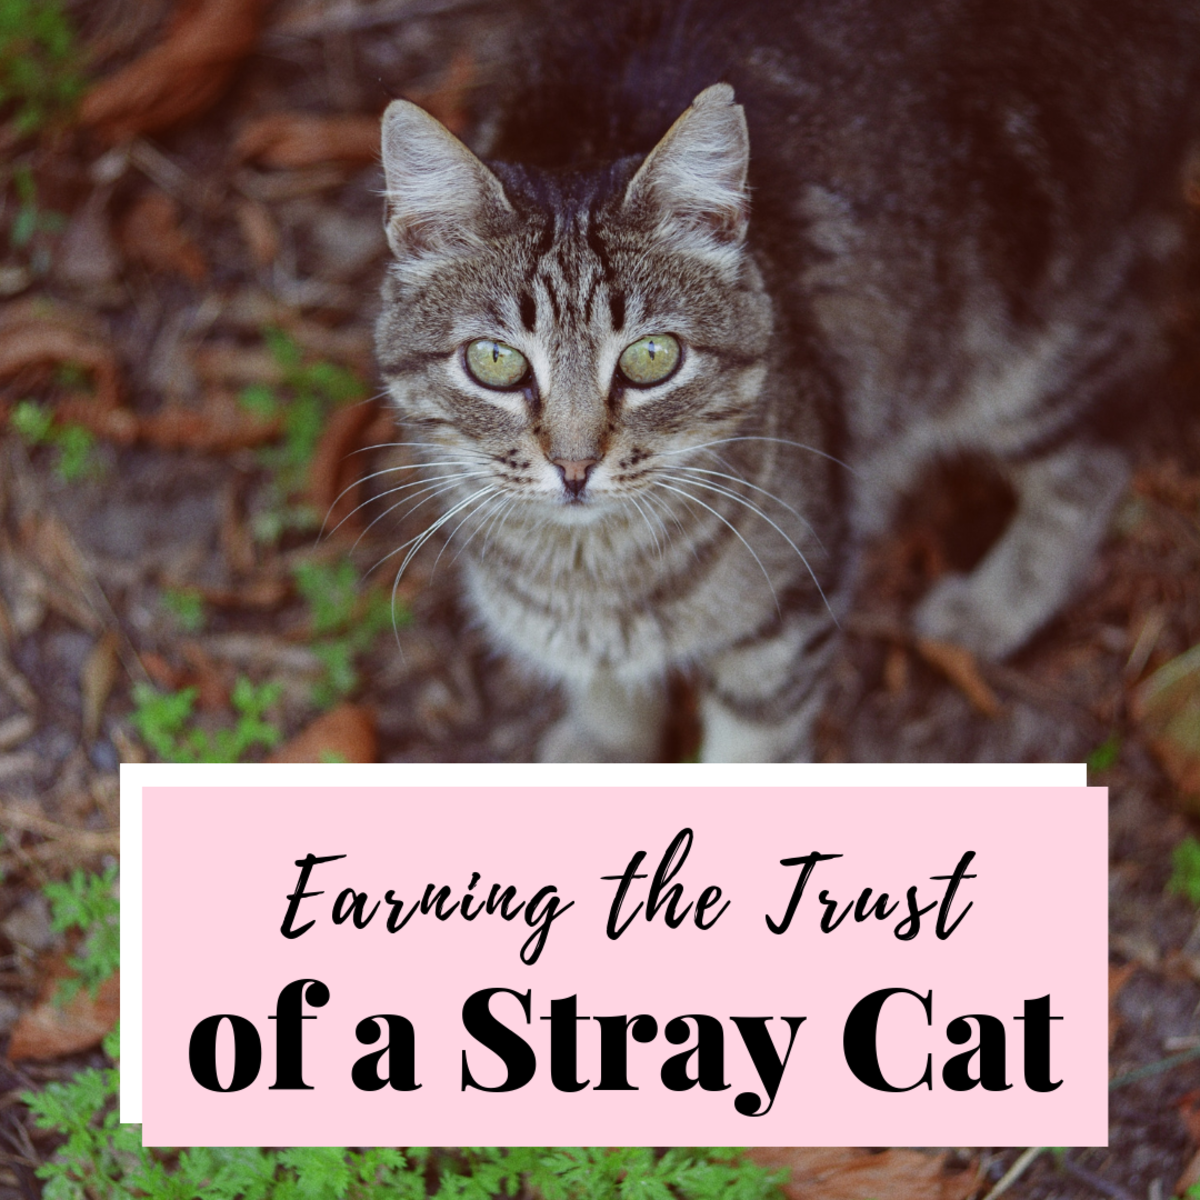 How To Get A Semi Feral Cat To Trust You Cat Lovster